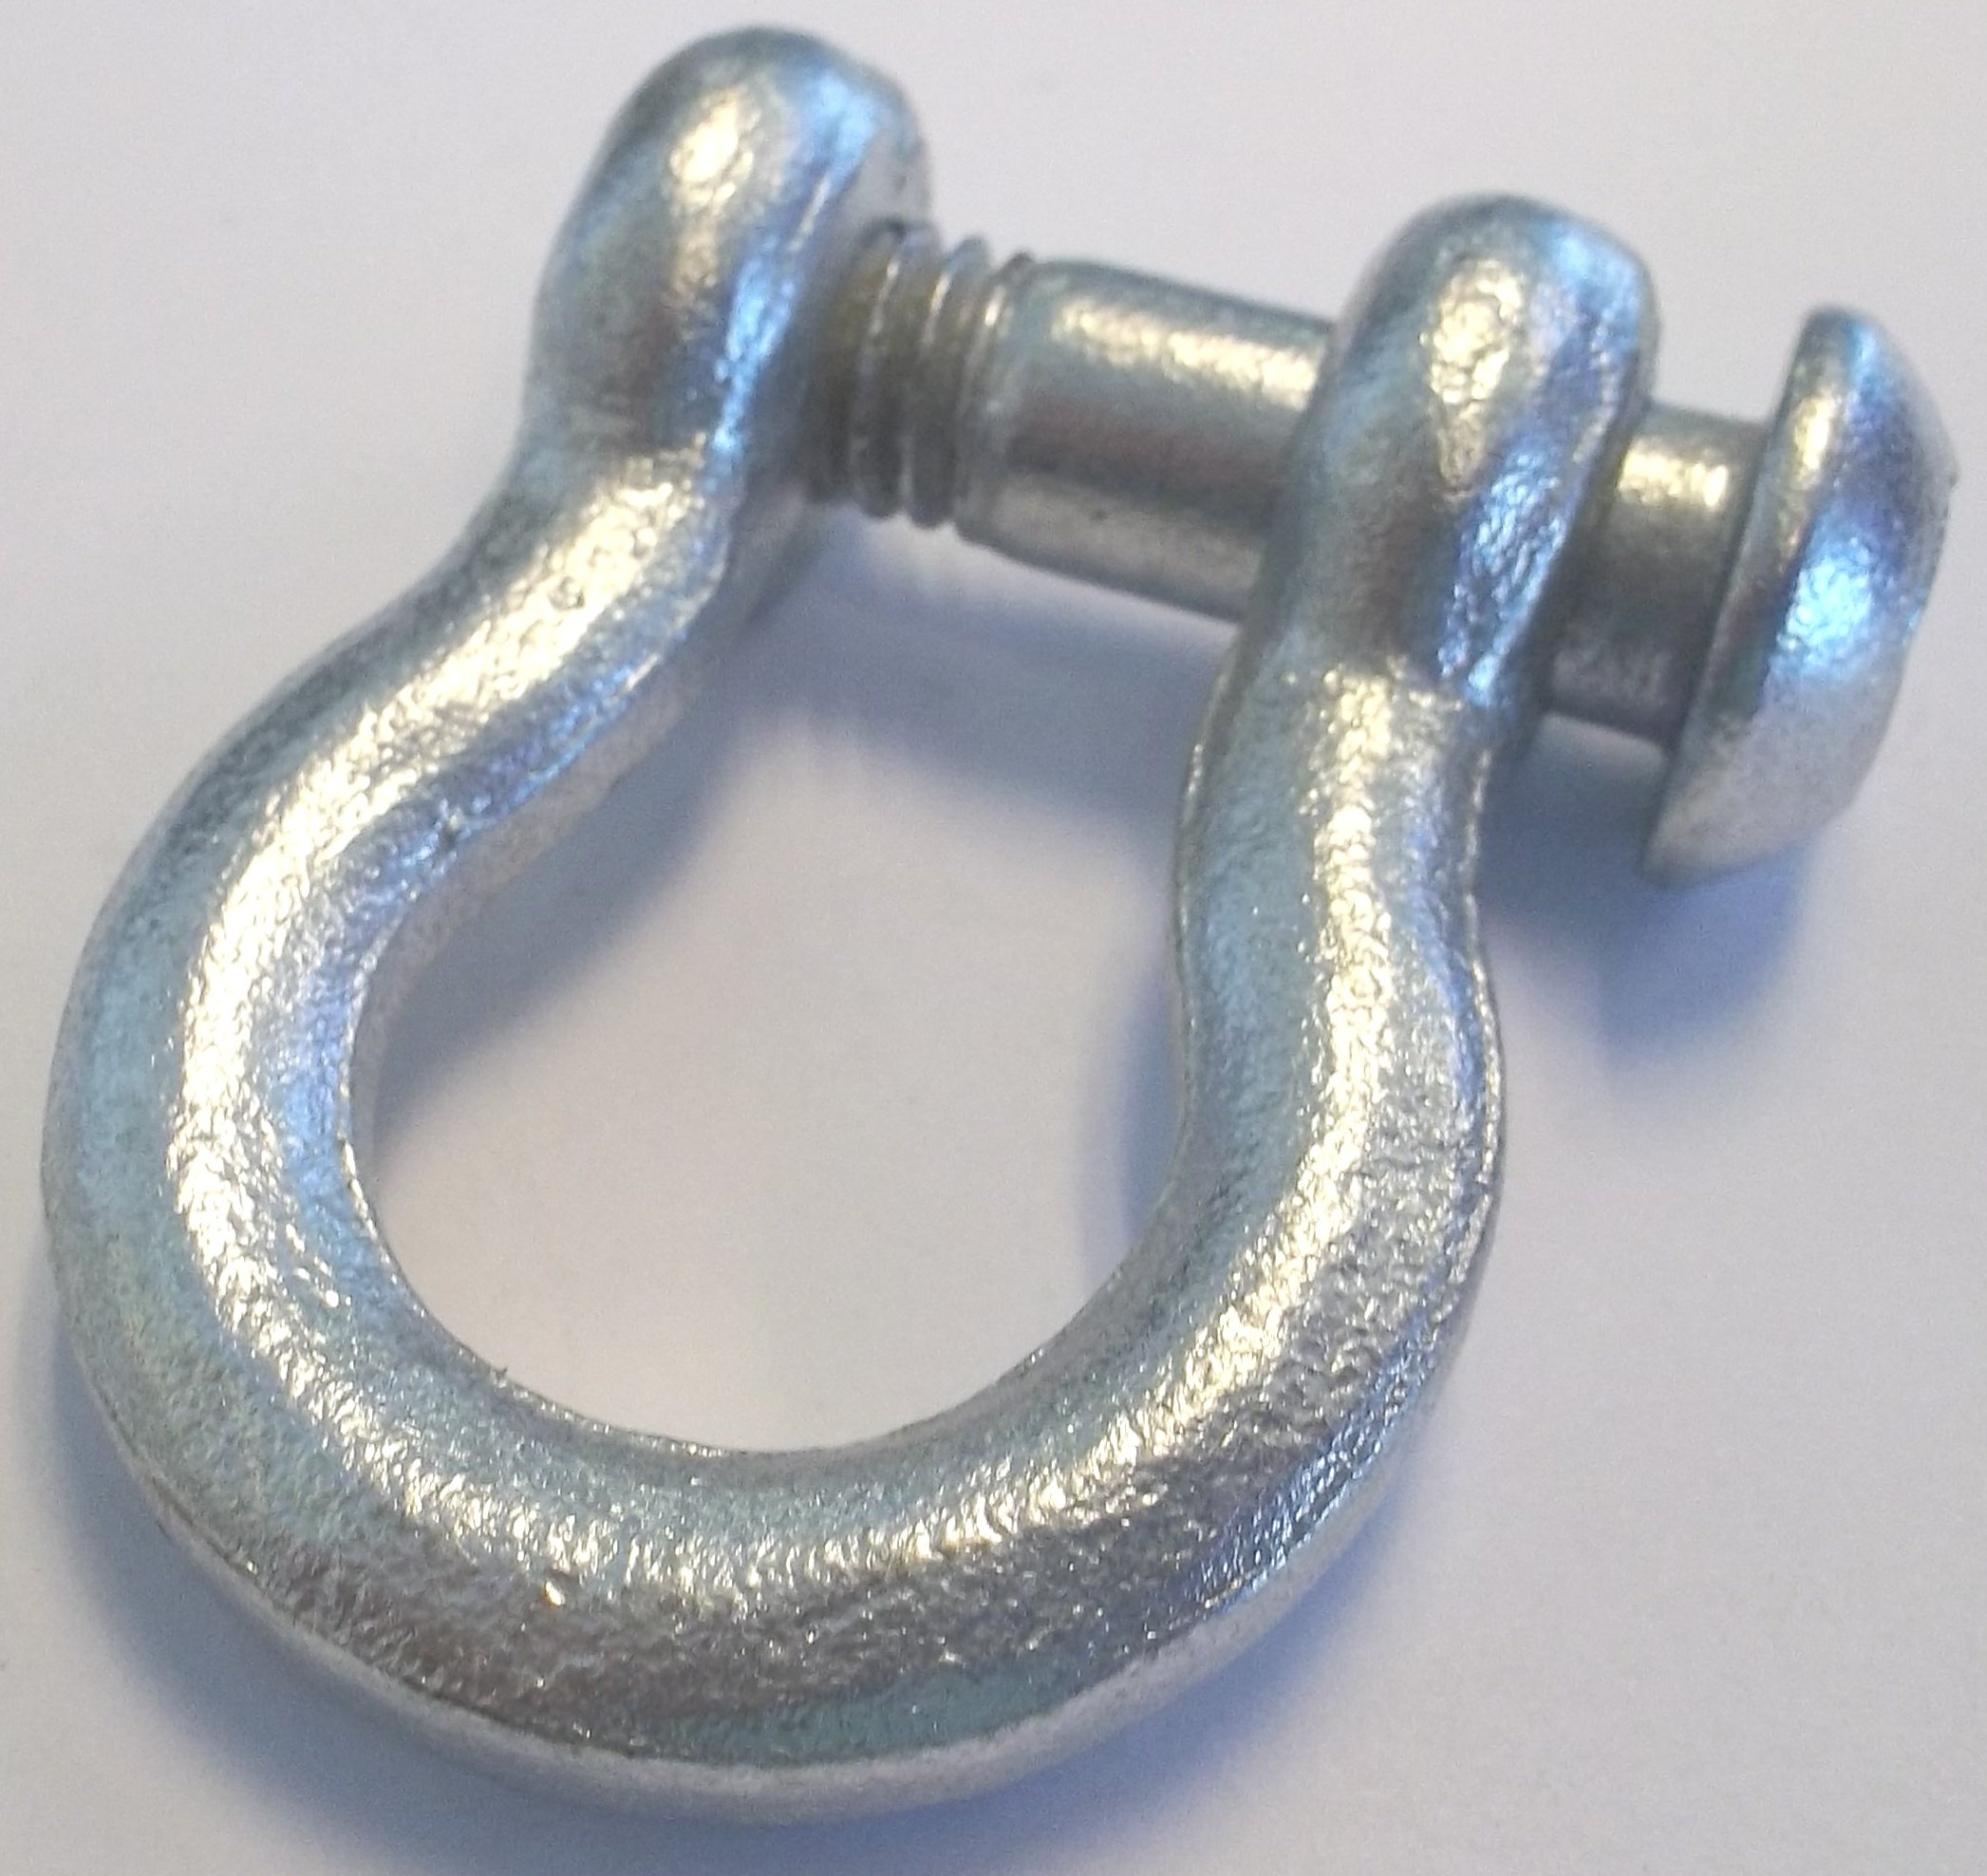 A5700 - Shackle w/Special Head Bolt 5/16"